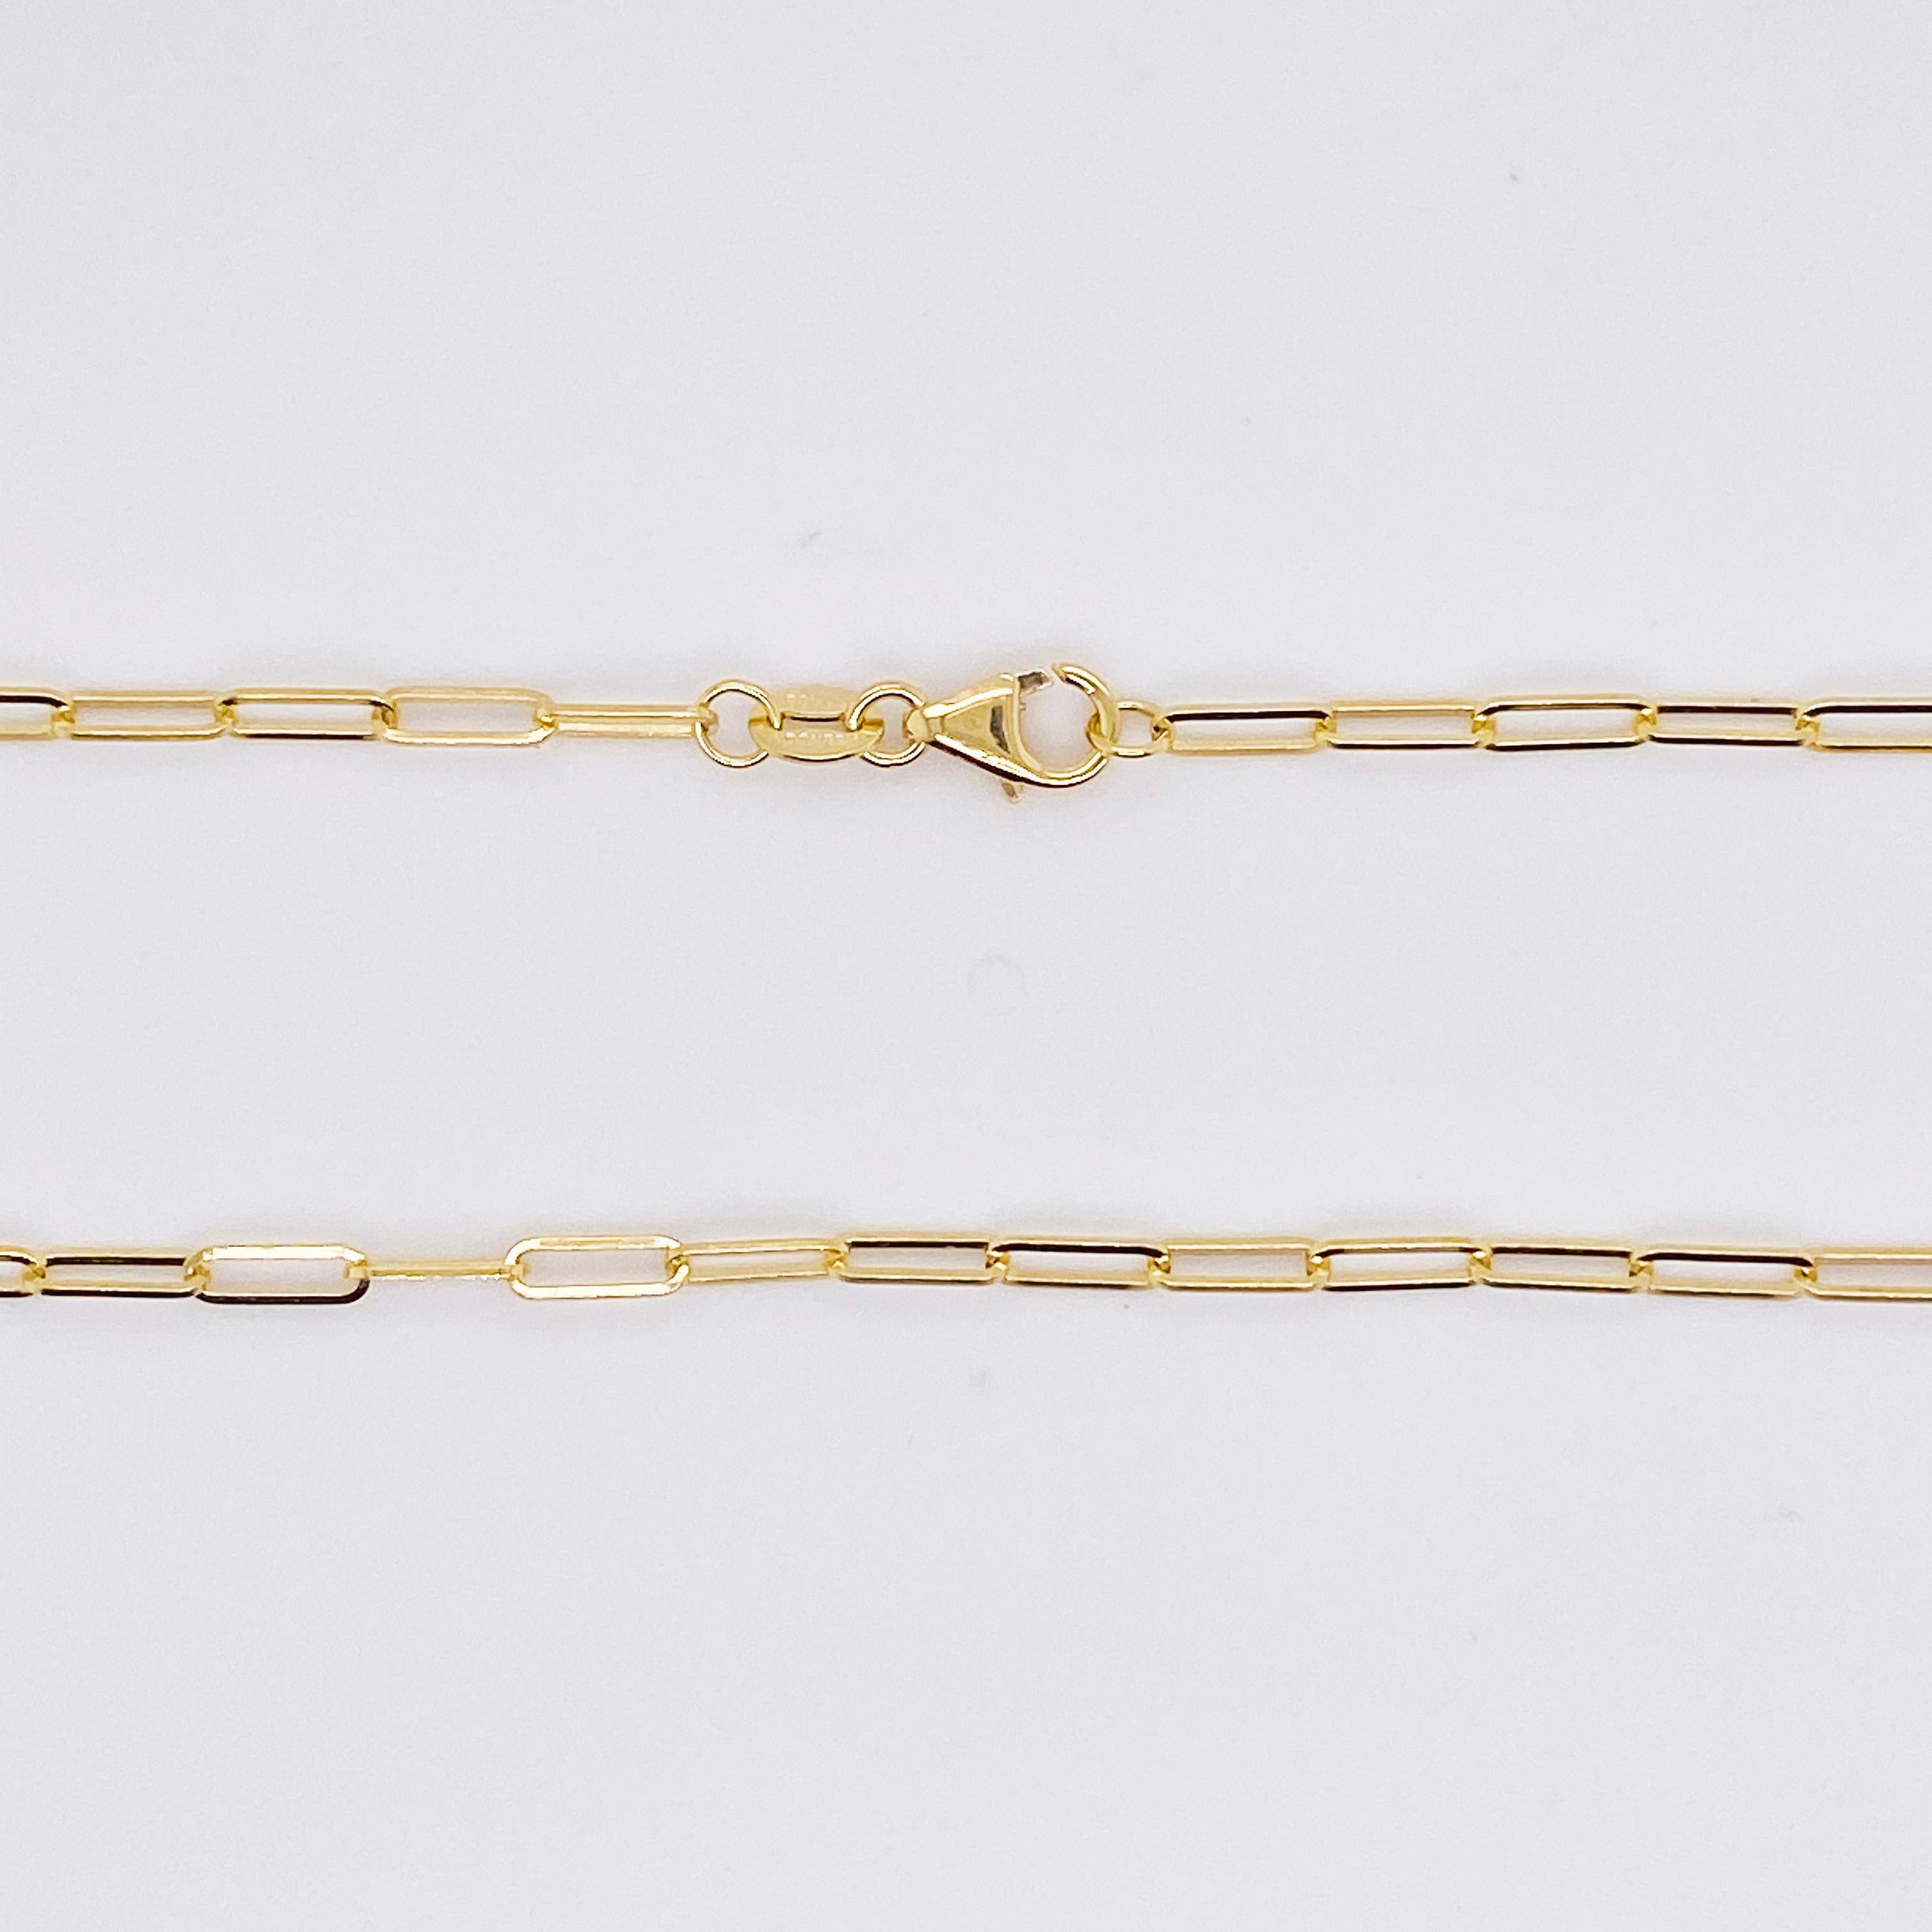 The 14 karat yellow gold paperclip chain is fabulous for anyone!  Wear it by itself, with a charm, or layer it with as many chains as you can for your own stylish and individual look!  This chain is 2.5 millimeters(mm) wide and the 18 inch length